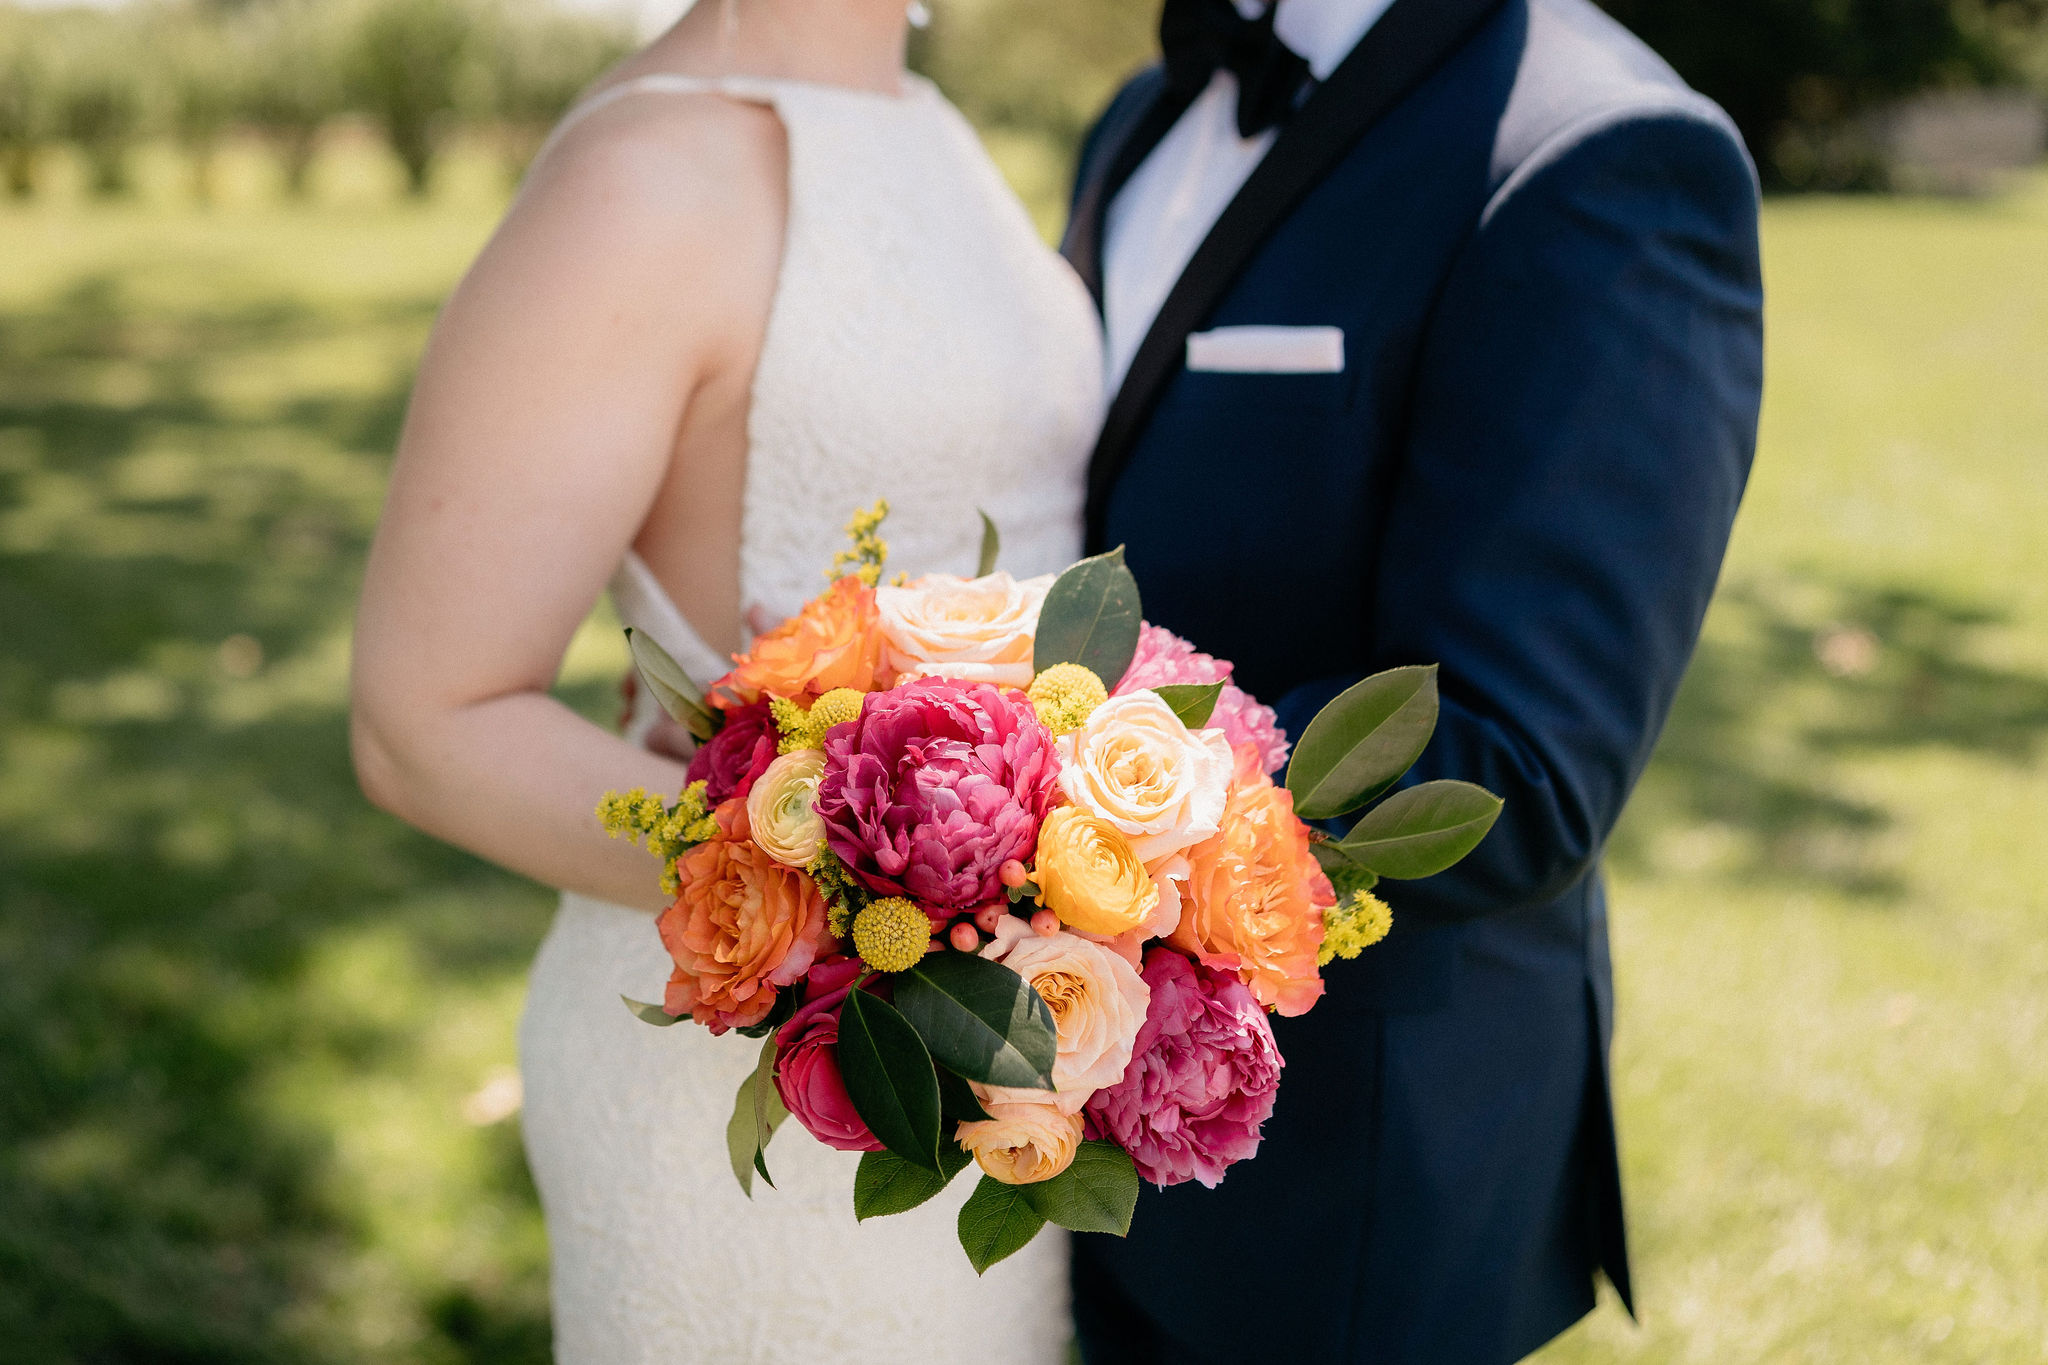 Bride and groom holding bouquet in sherbet colors